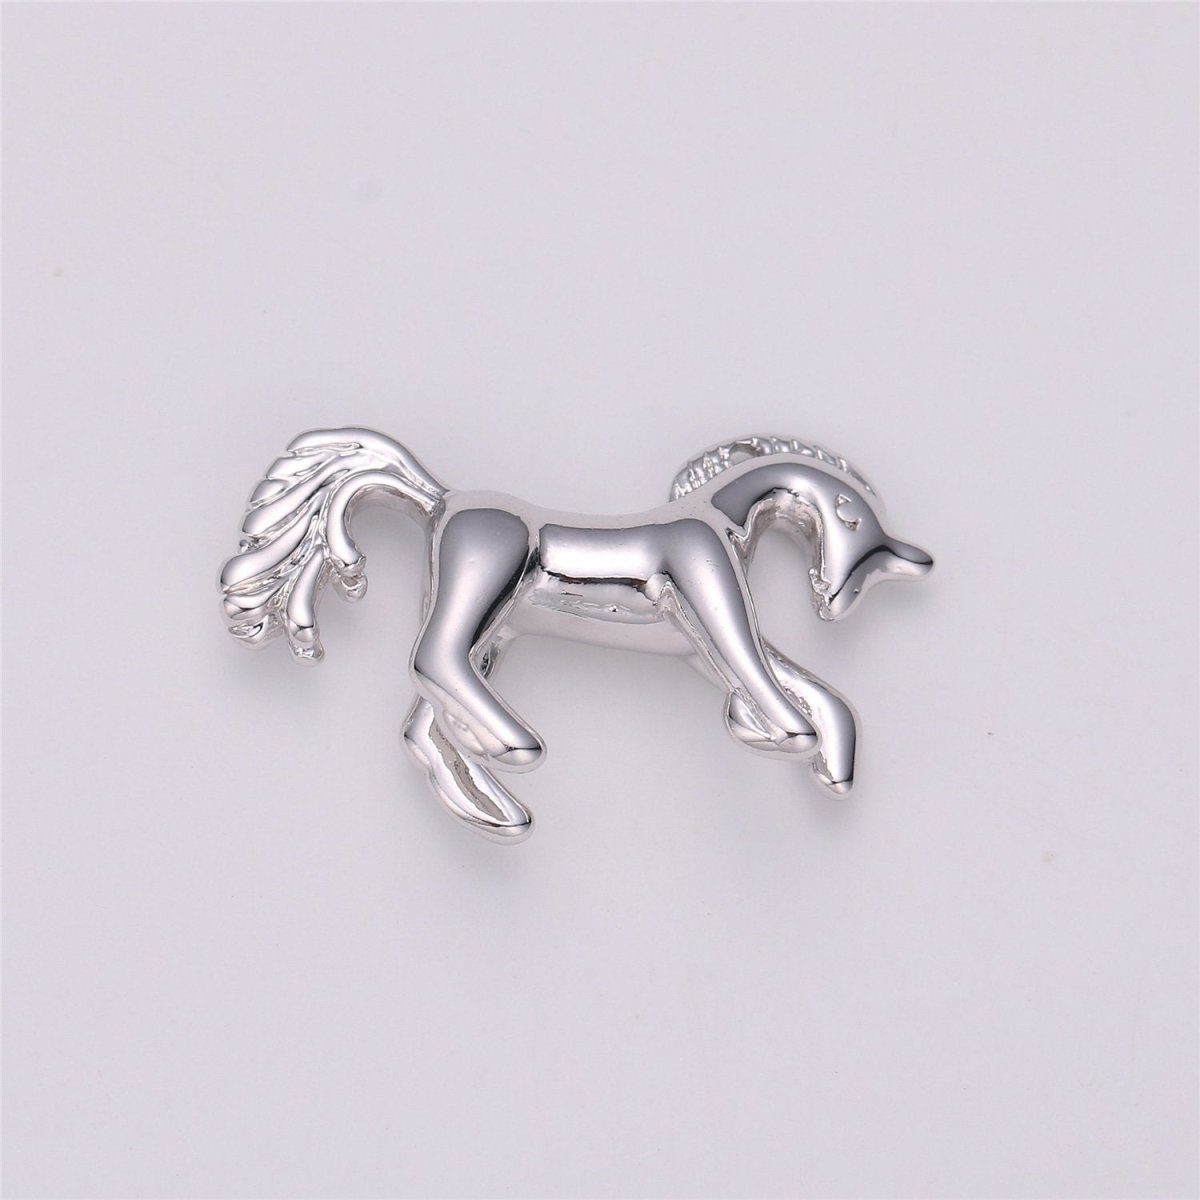 18k gold Filled horse charms, stallion charm, gold horse pendants, horse jewelry, animal charms, Horse equestrian jewelry 3D Charm, C-527 - DLUXCA